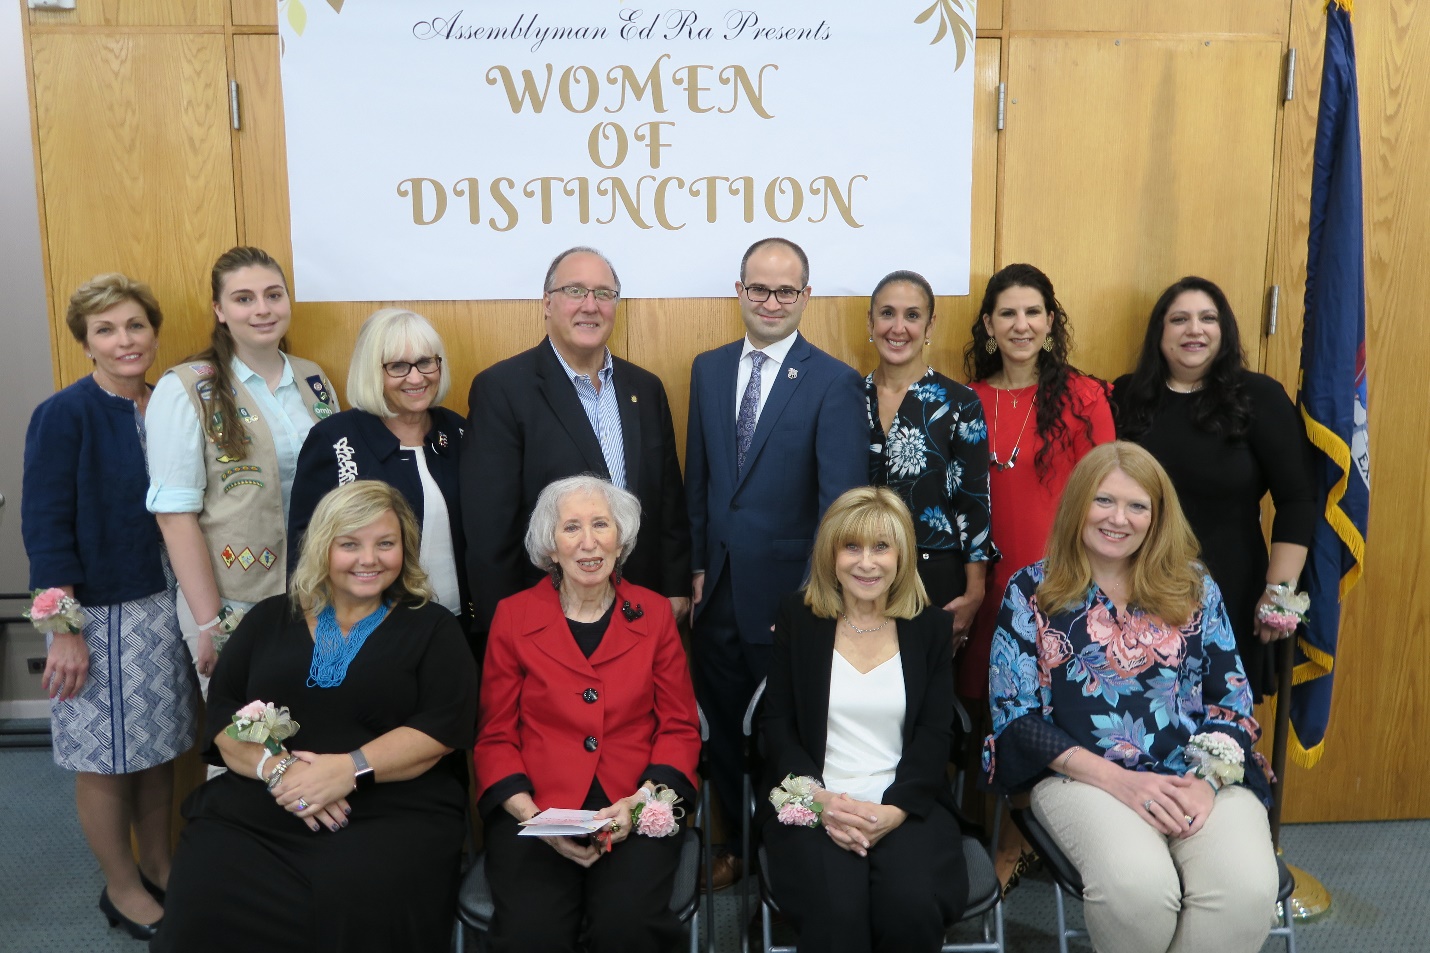 Assemblyman Ed Ra (R-Franklin Square) honored eight local women with his 2018 Women of Distinction Award on Saturday, October 6 at the Westbury Memorial Public Library. (From left to right, back row)